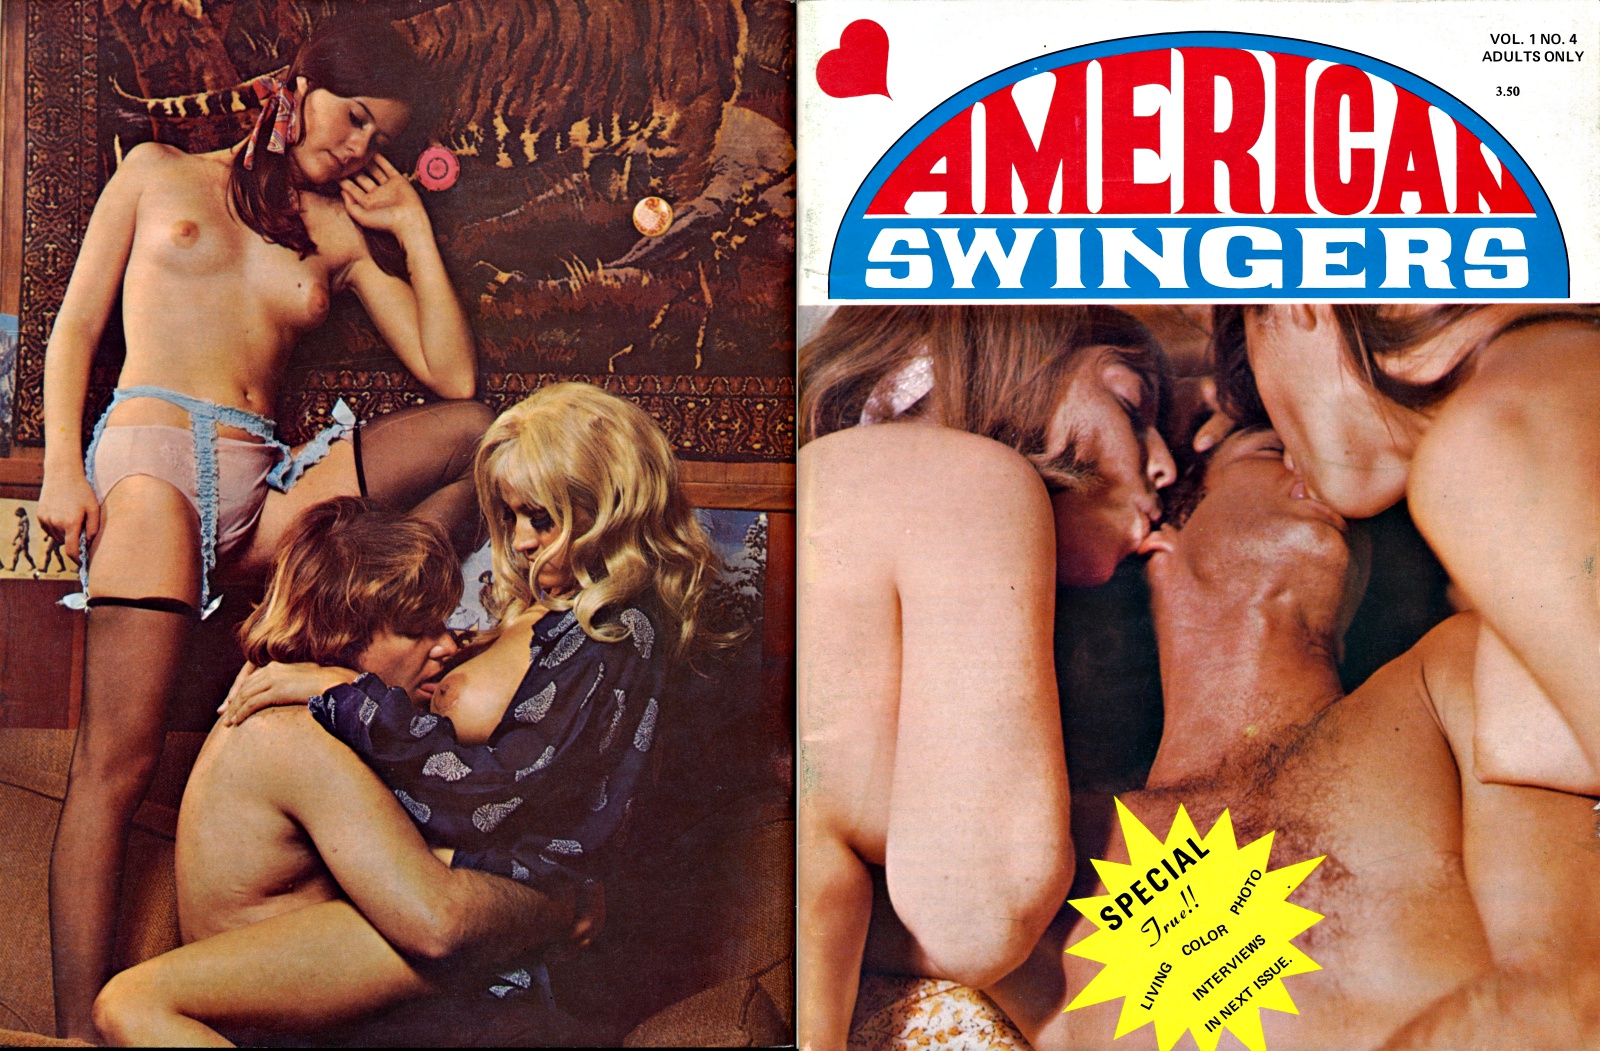 American Swingers (vintage adult magazine, 1970) by American Publications, Inc. Very Good (1970) Well-Stacked Books photo pic